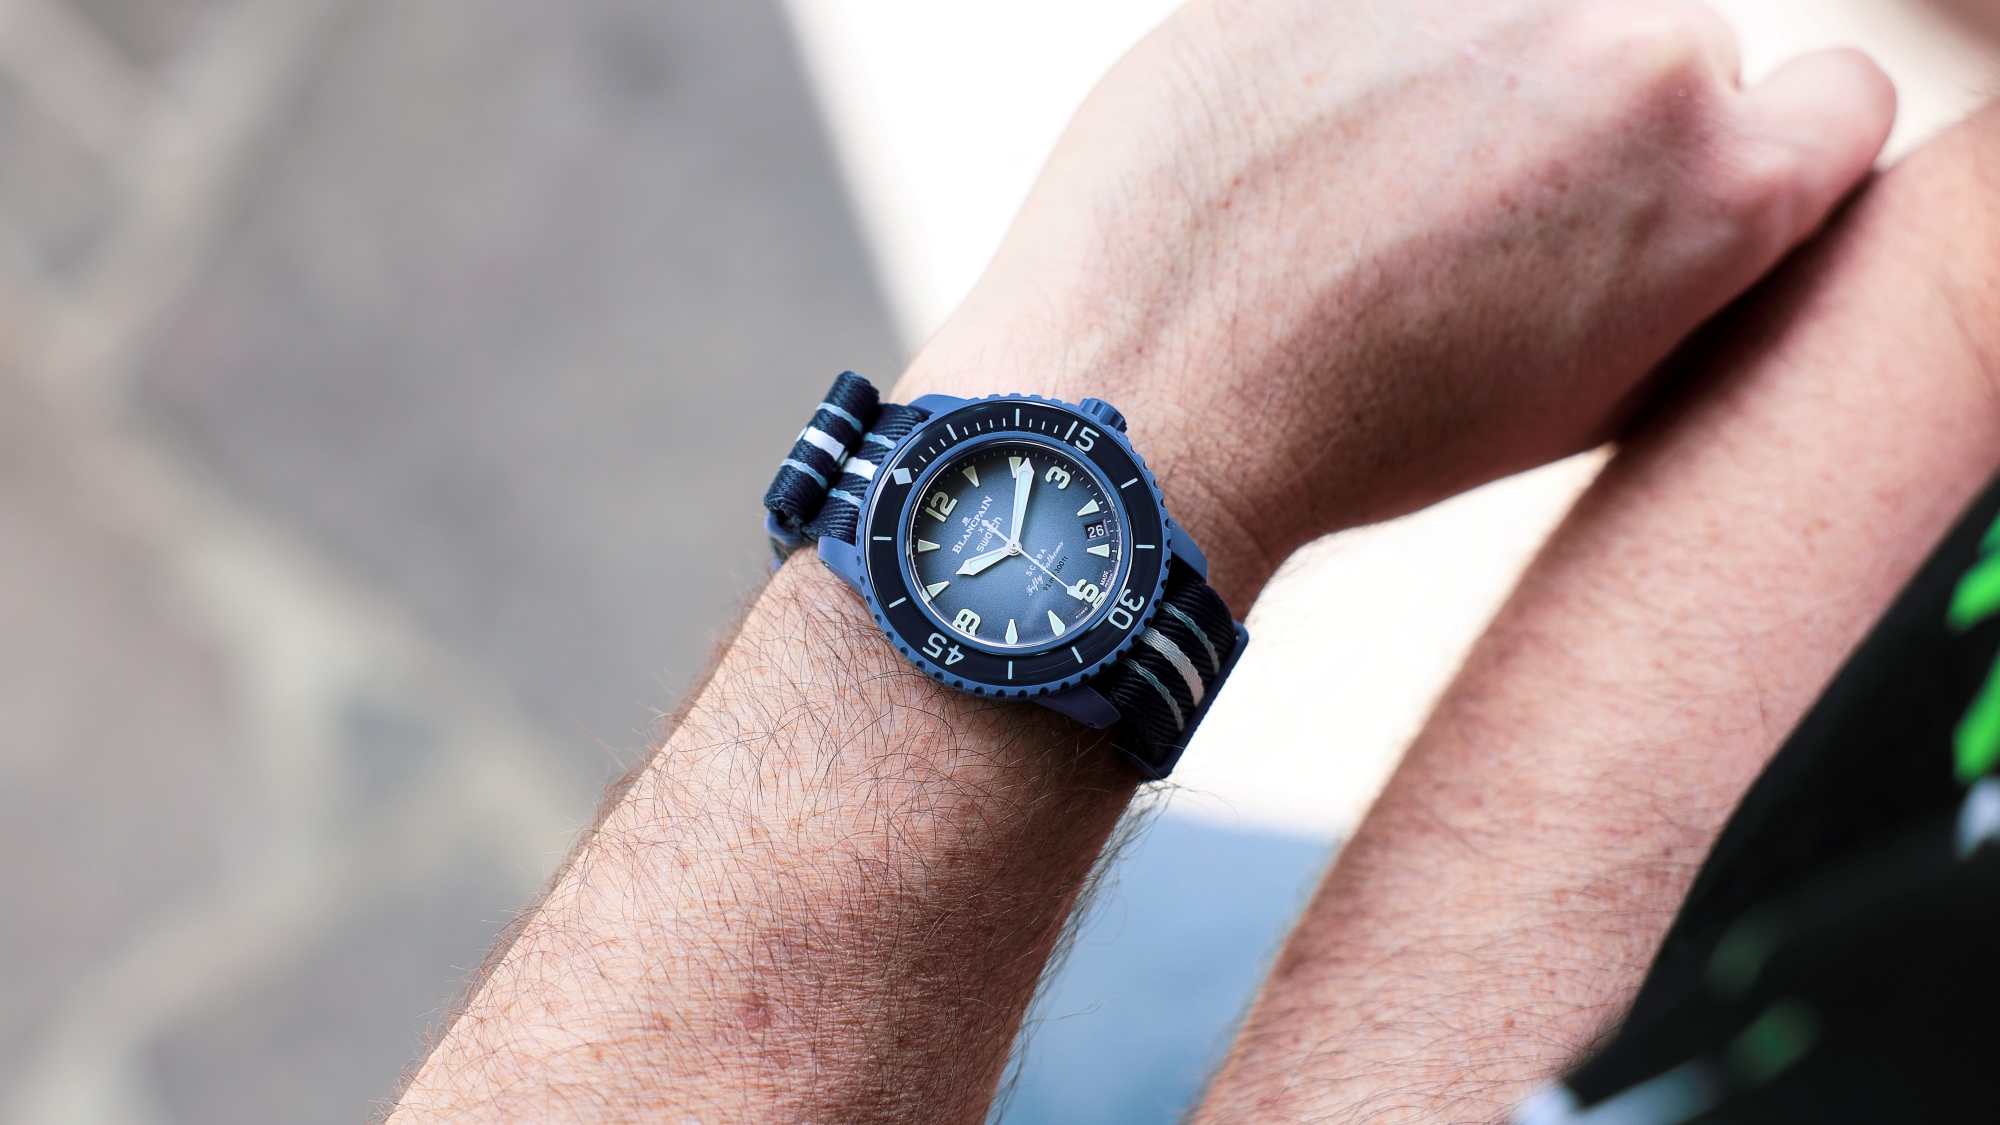 Enter Our Blancpain x Swatch Giveaway! – Watch Advice